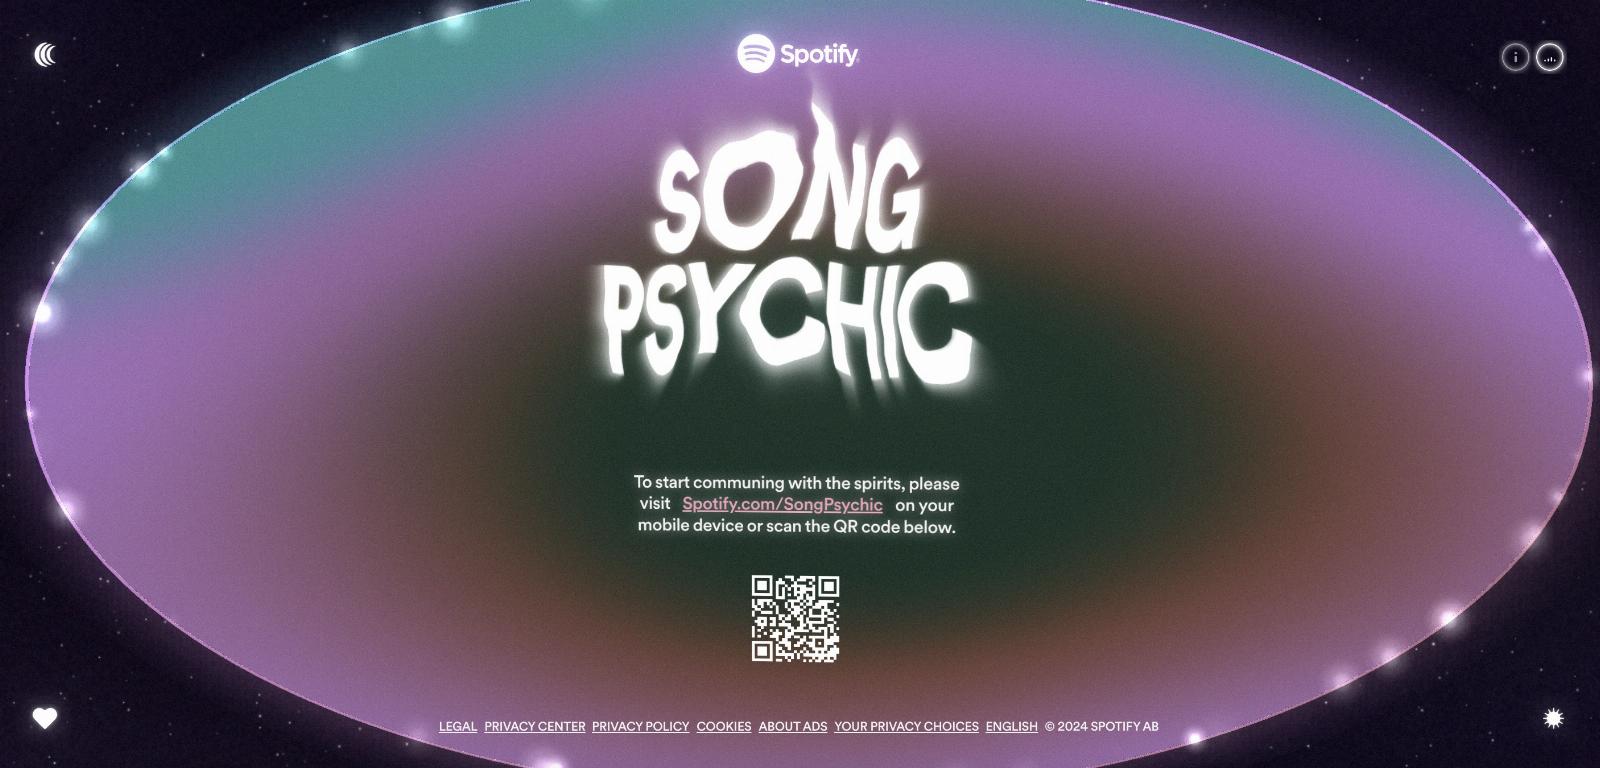 Spotify’s new ‘Song Psychic’ is like a Magic 8 Ball that answers your questions with music